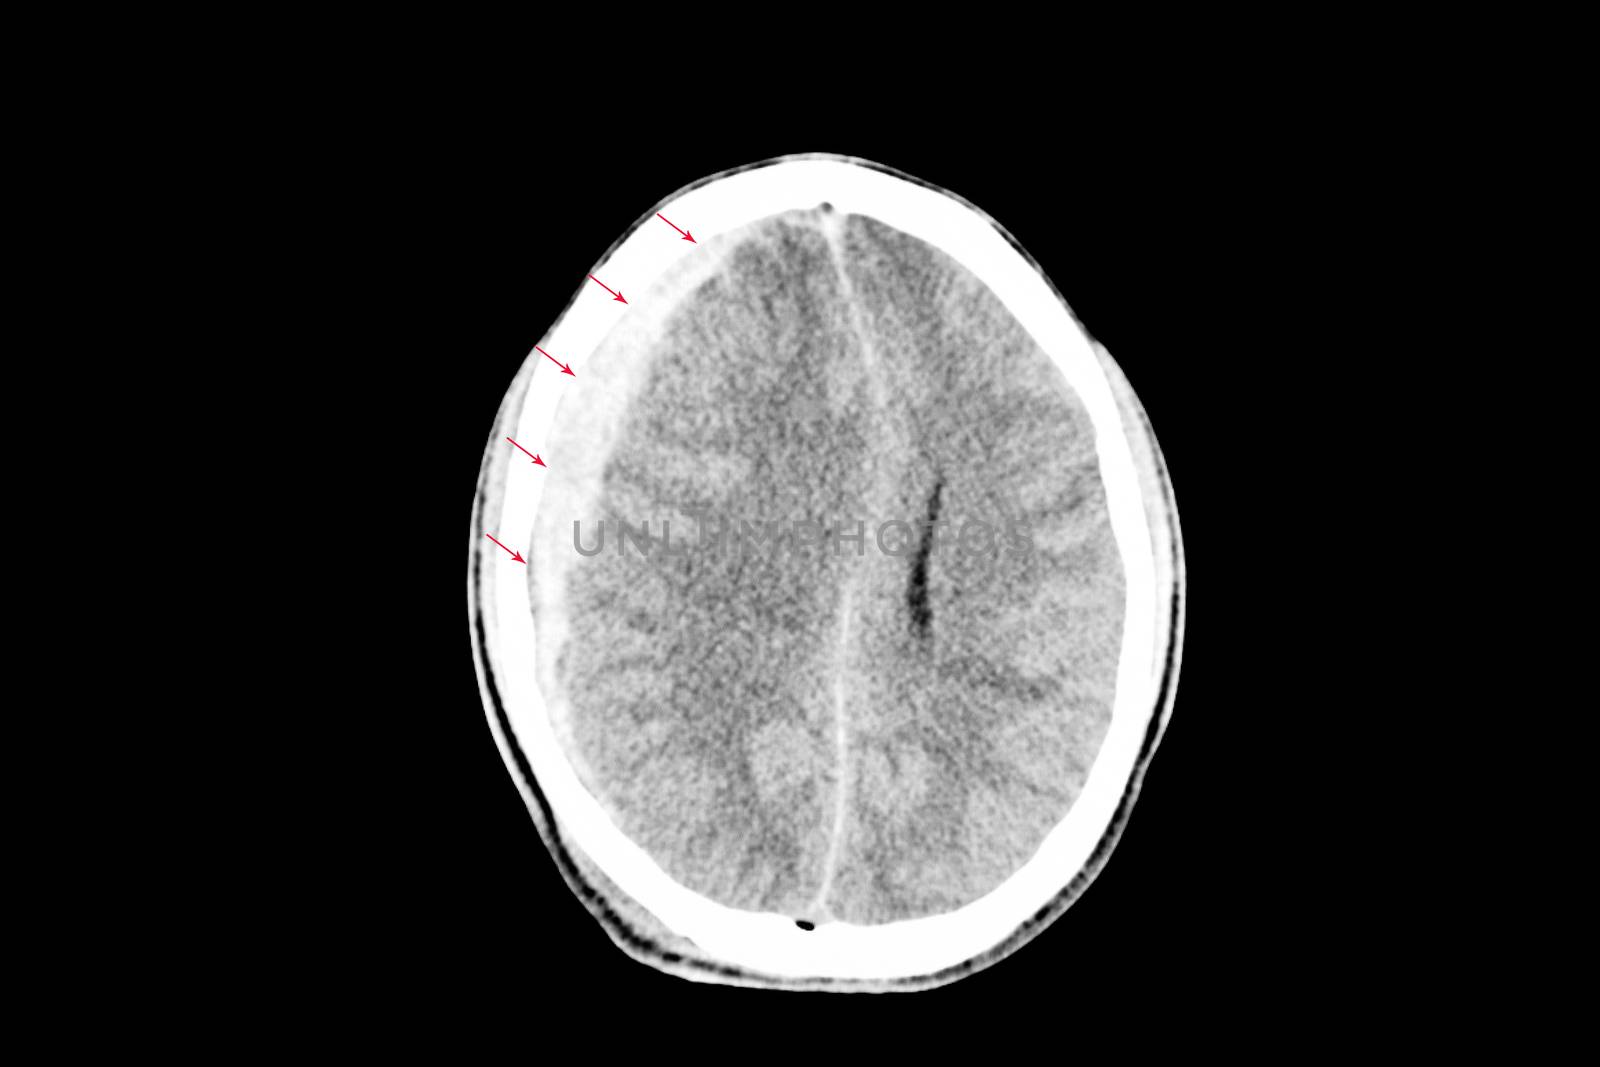 a brain CT scan of a patient with traumatic brain injury showing right subdural hemorrhage and brain edema with shifting of falx cerebri to the left